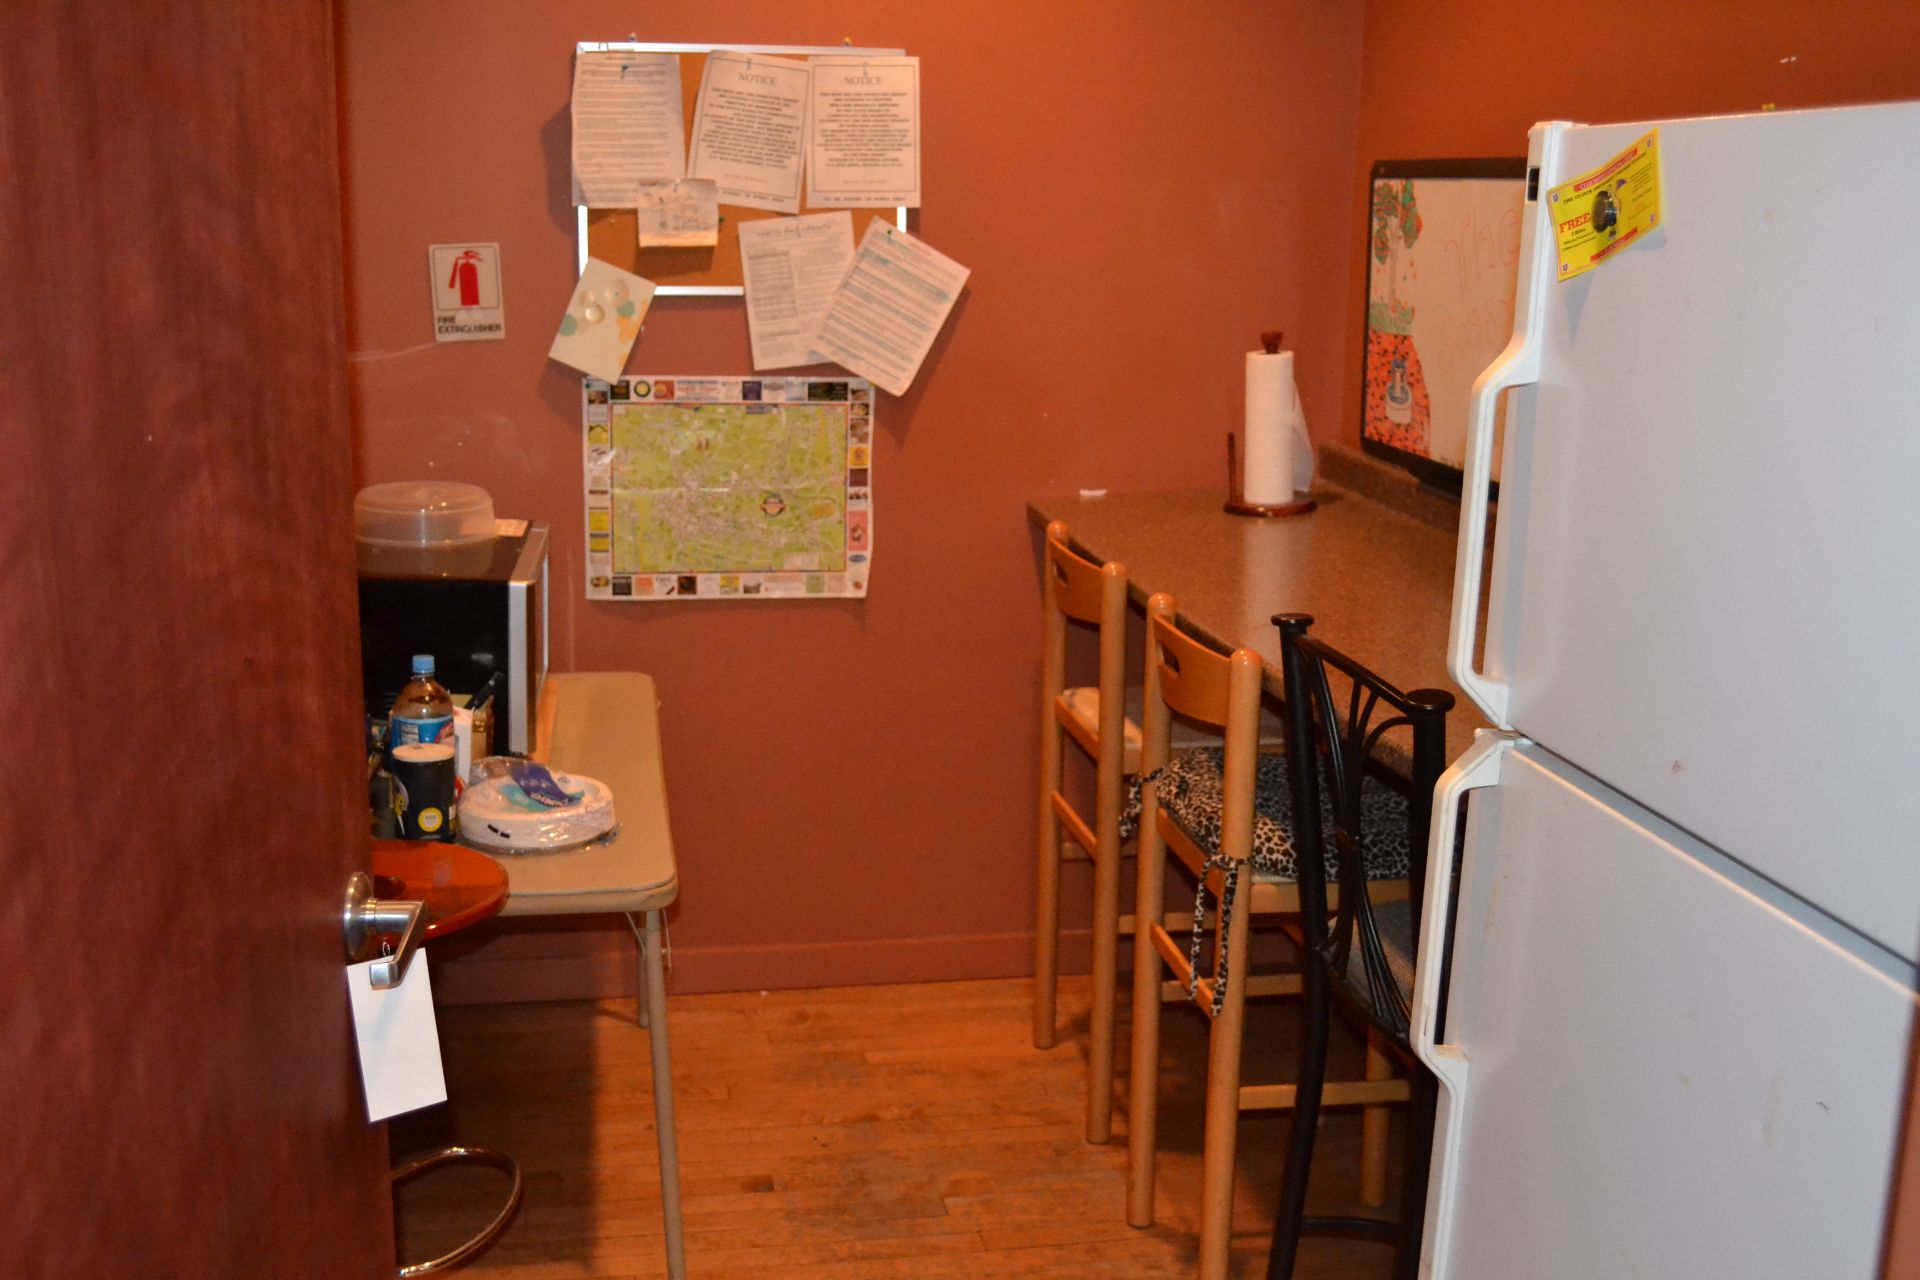 Contents of Breakroom: Fridge, Countertop, Table, Chairs & microwave